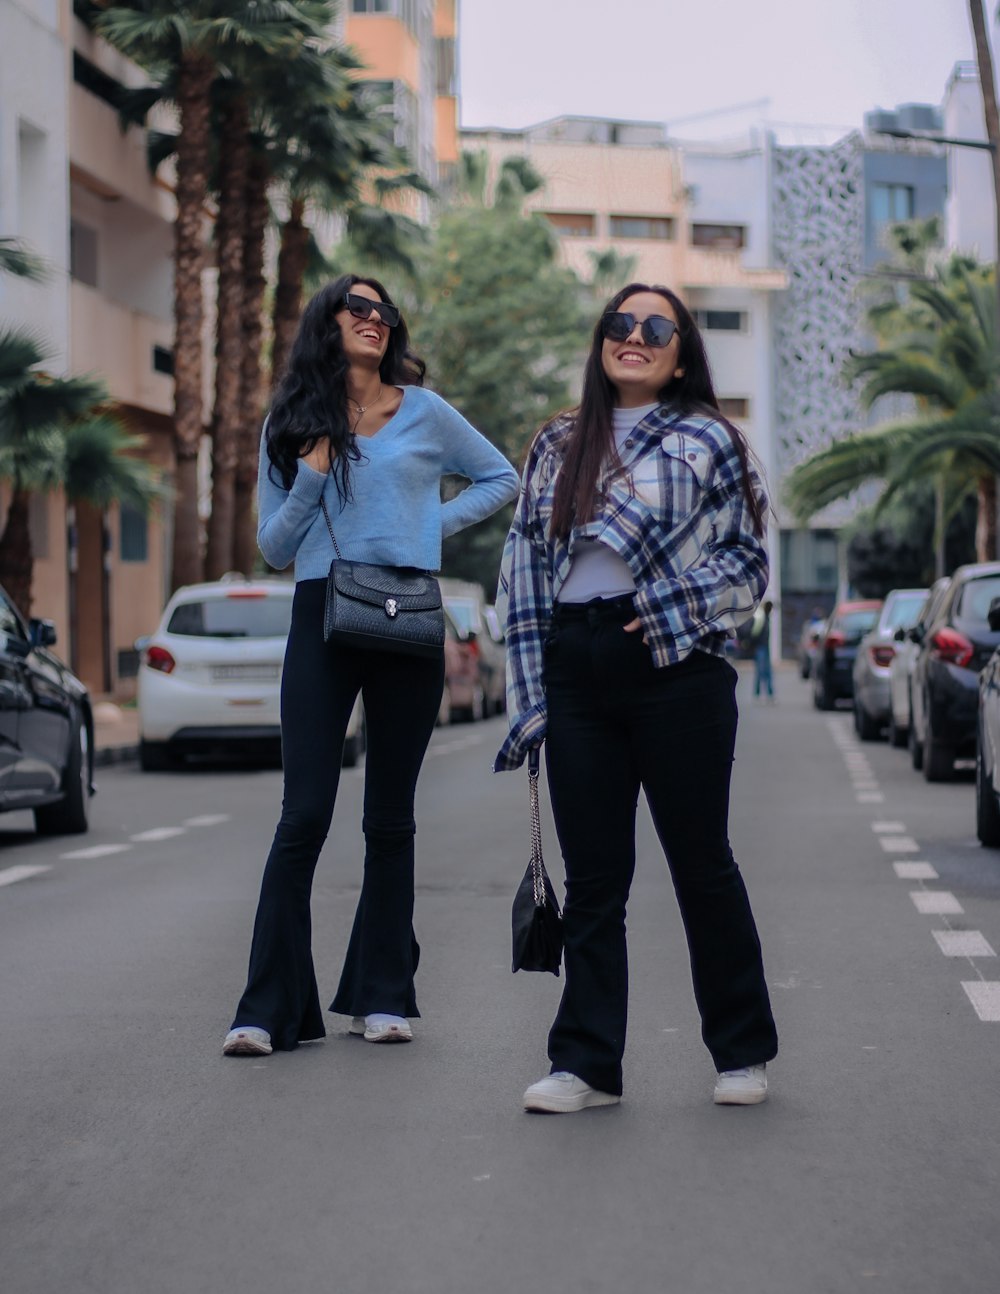 2 women standing on road during daytime